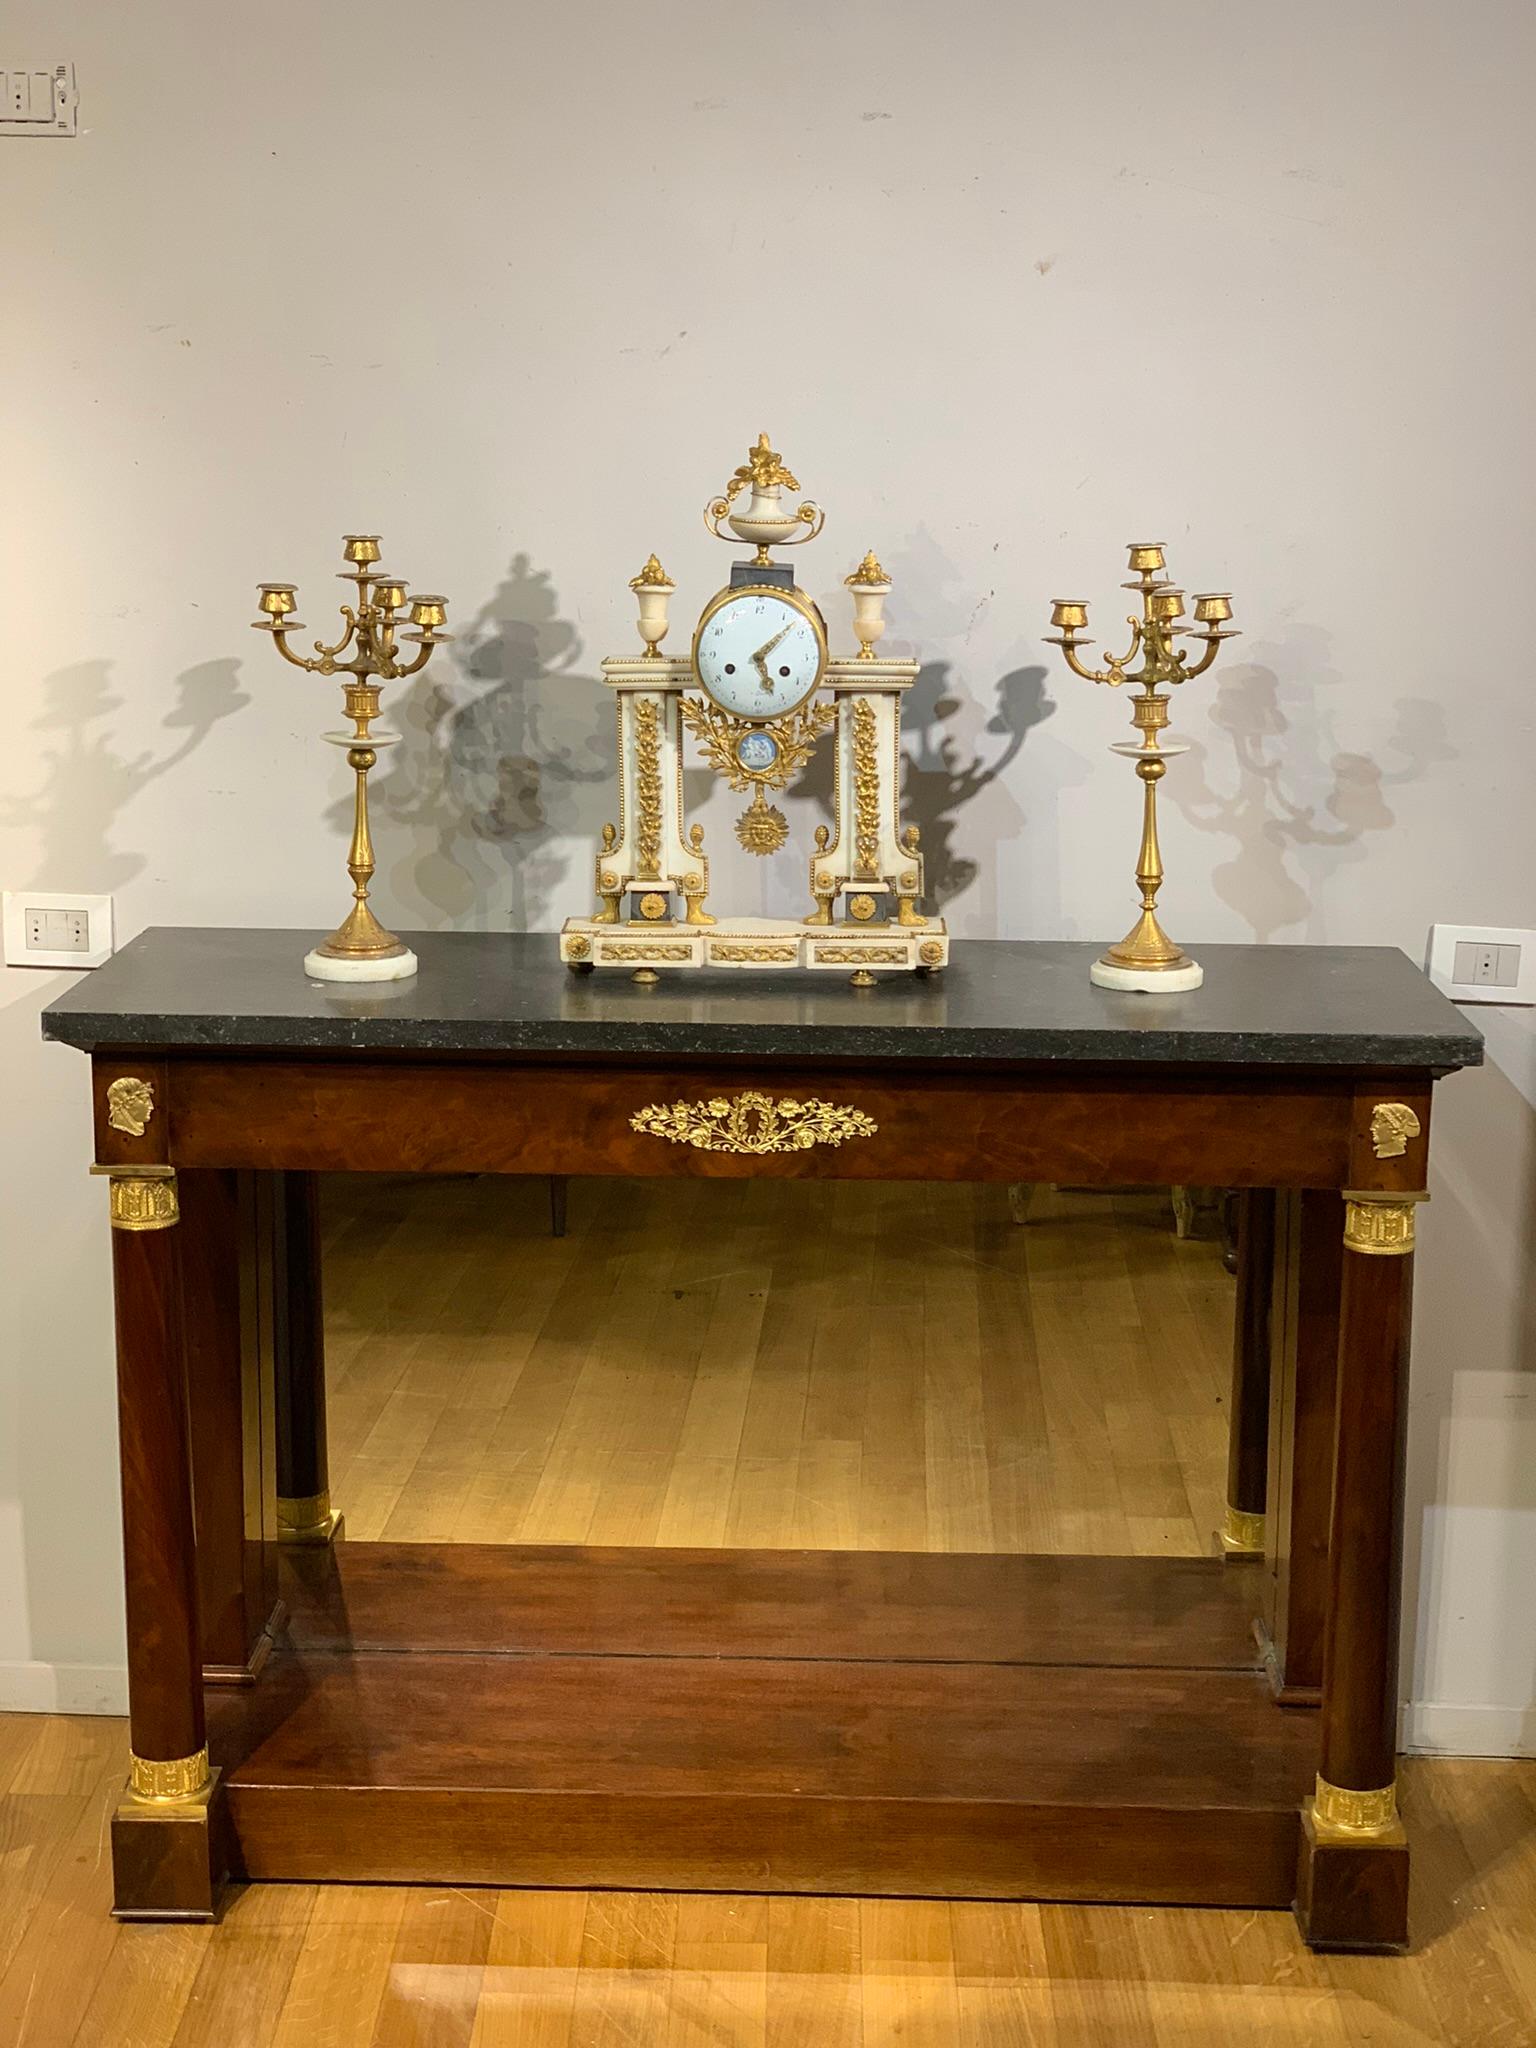 Beautiful console veneered in mahogany with columns ending with Corinthian capitals chiselled in gilded mercury bronze. A drawer in the band embellished with a stupendous bronze frieze en pendant with the two classic profiles above the columns. The